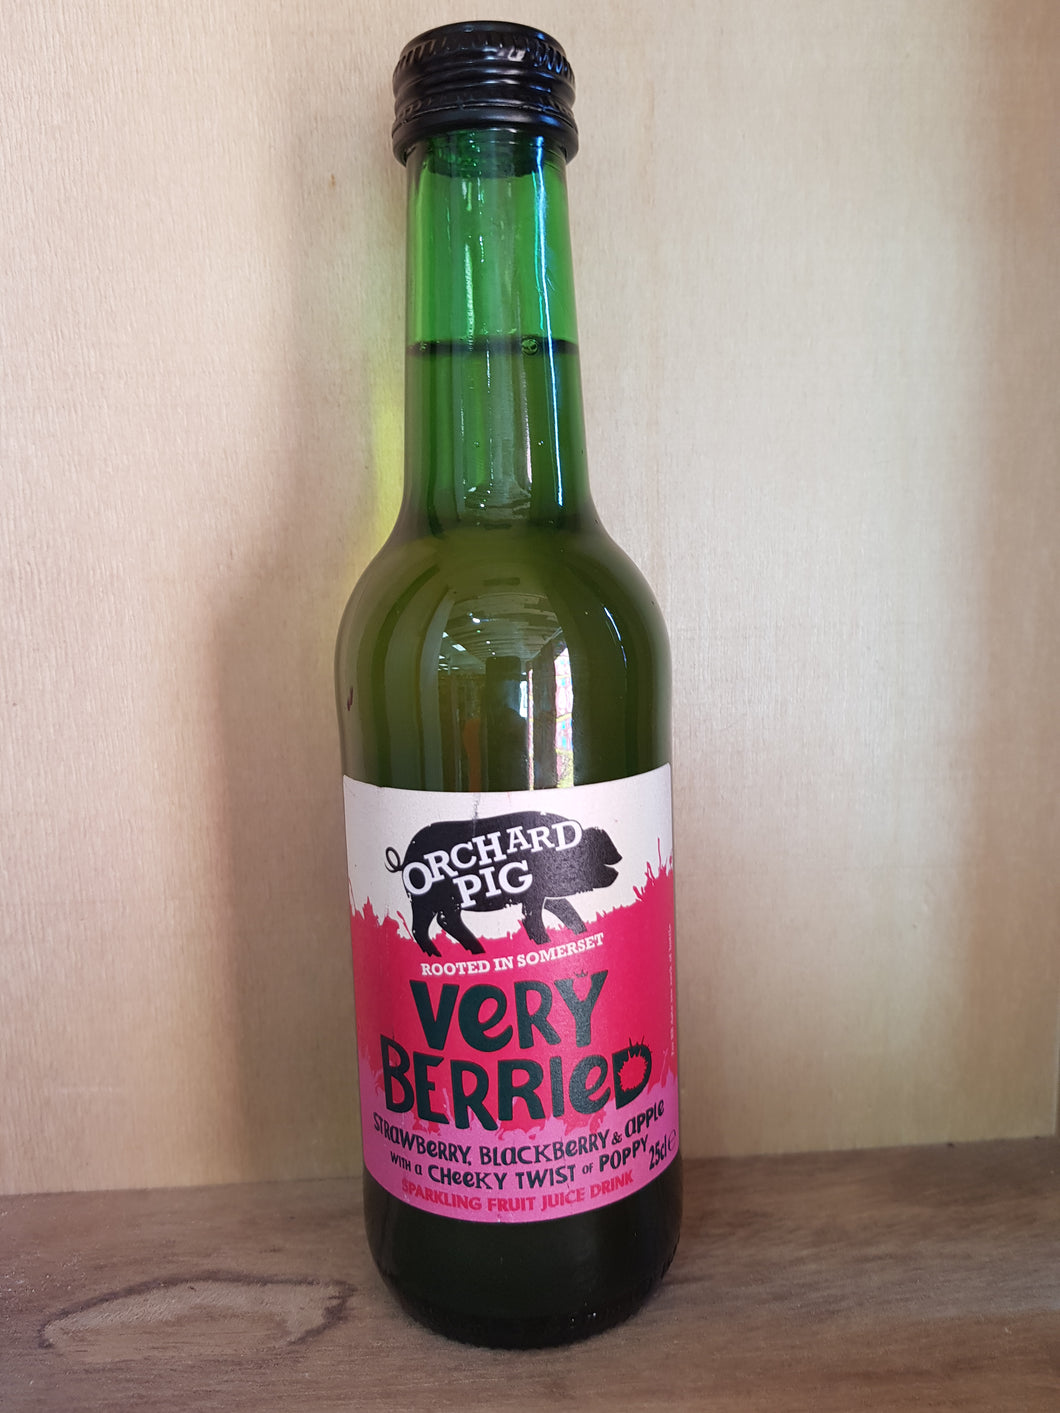 Orchard Pig Very Berried Strawberry, Blackberry & Apple Sparkling Fruit Juice 250ml